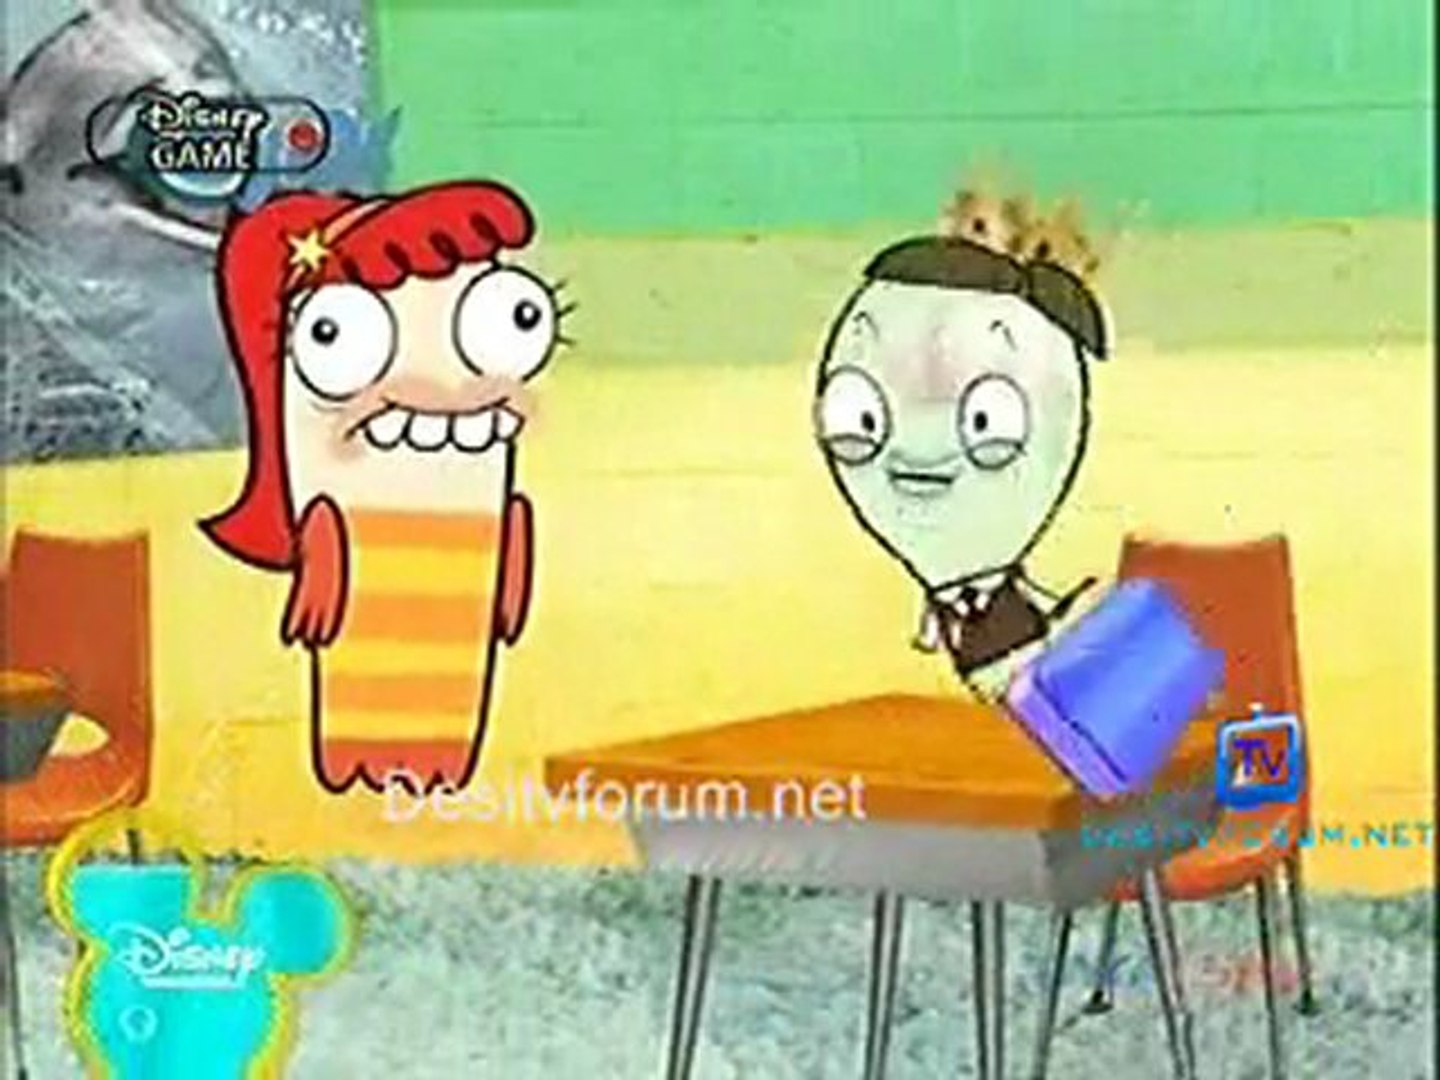 Fish Hooks - 18th June 2011 Watch Video Online p1 - video Dailymotion